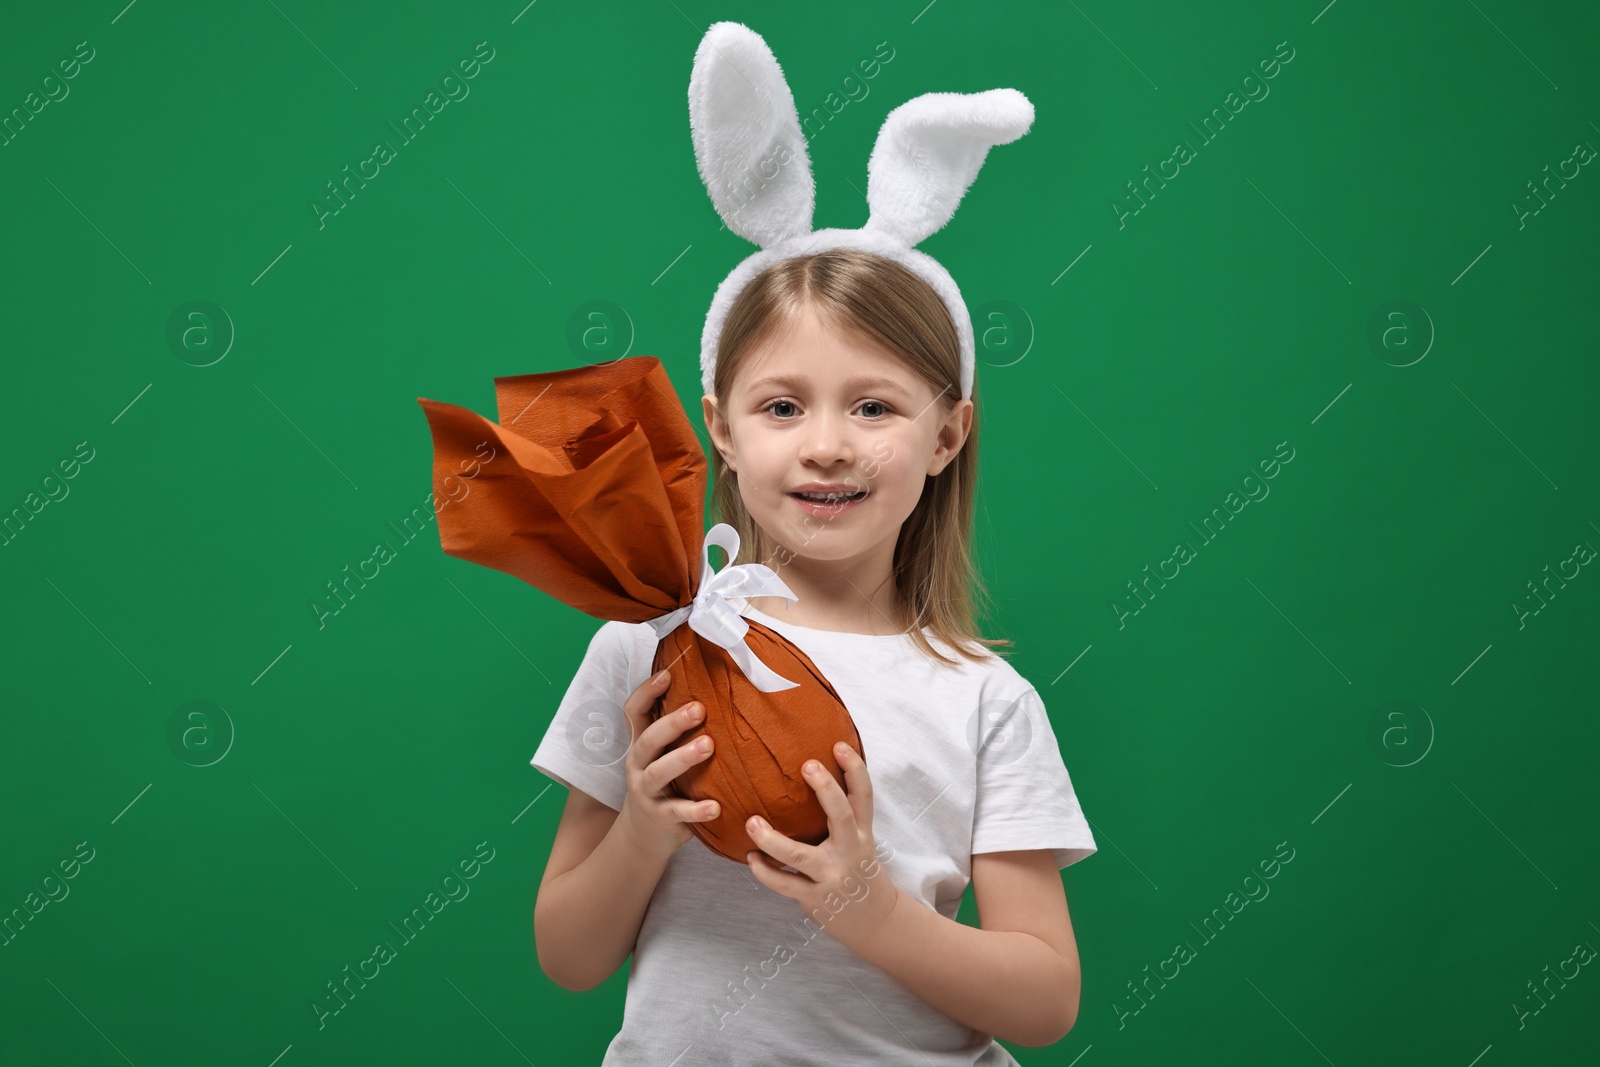 Photo of Easter celebration. Cute girl with bunny ears holding wrapped gift on green background